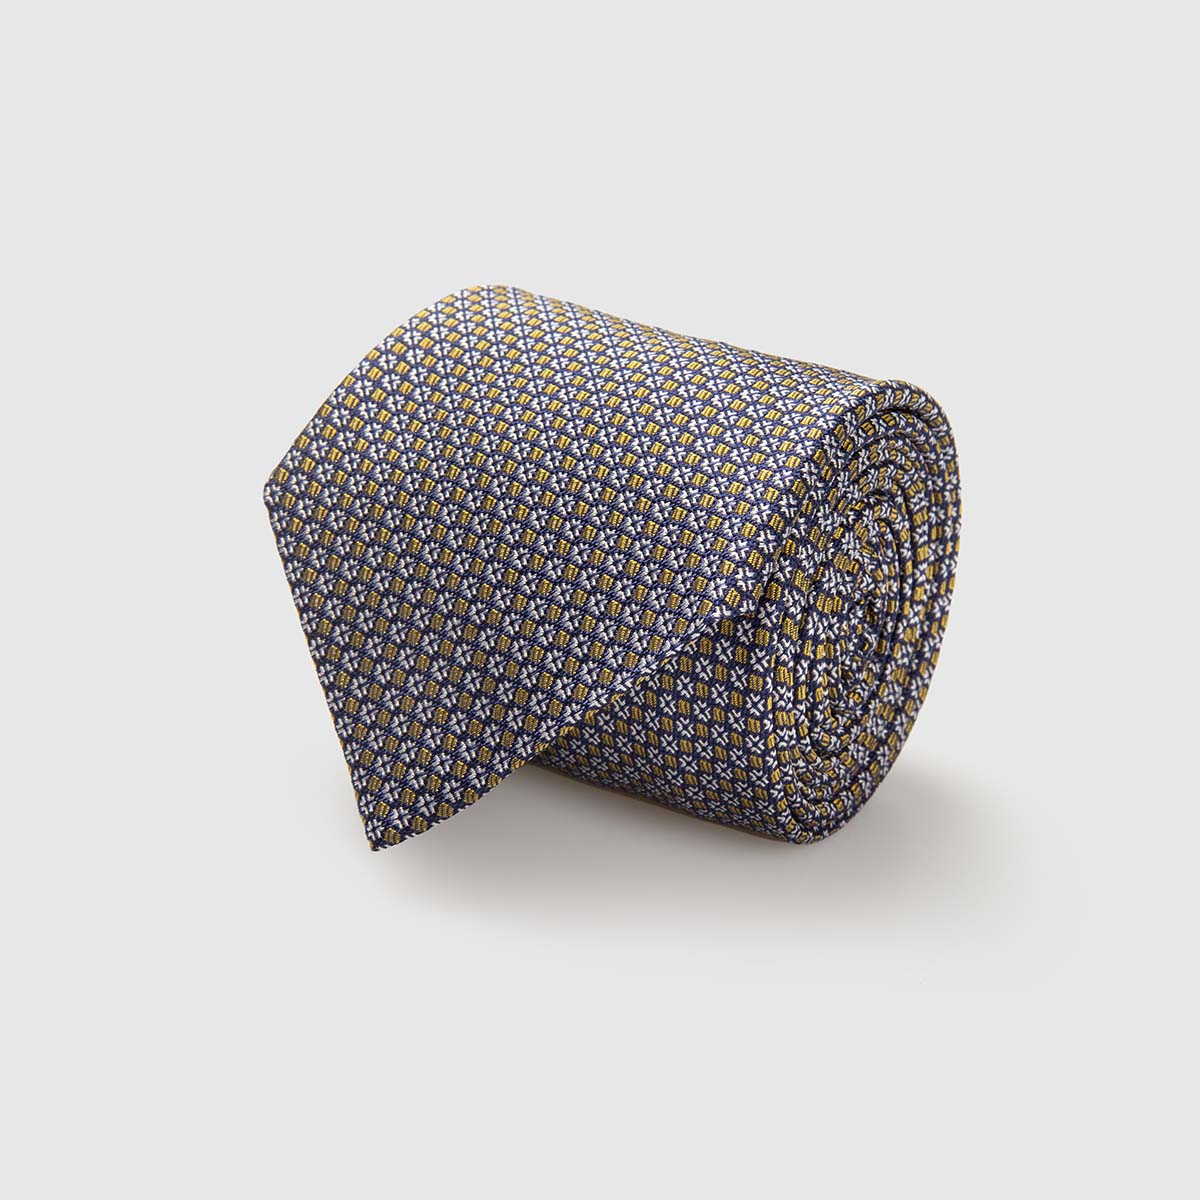 5-Fold Silk Jacquard Tie with geometrical pattern in gold and white